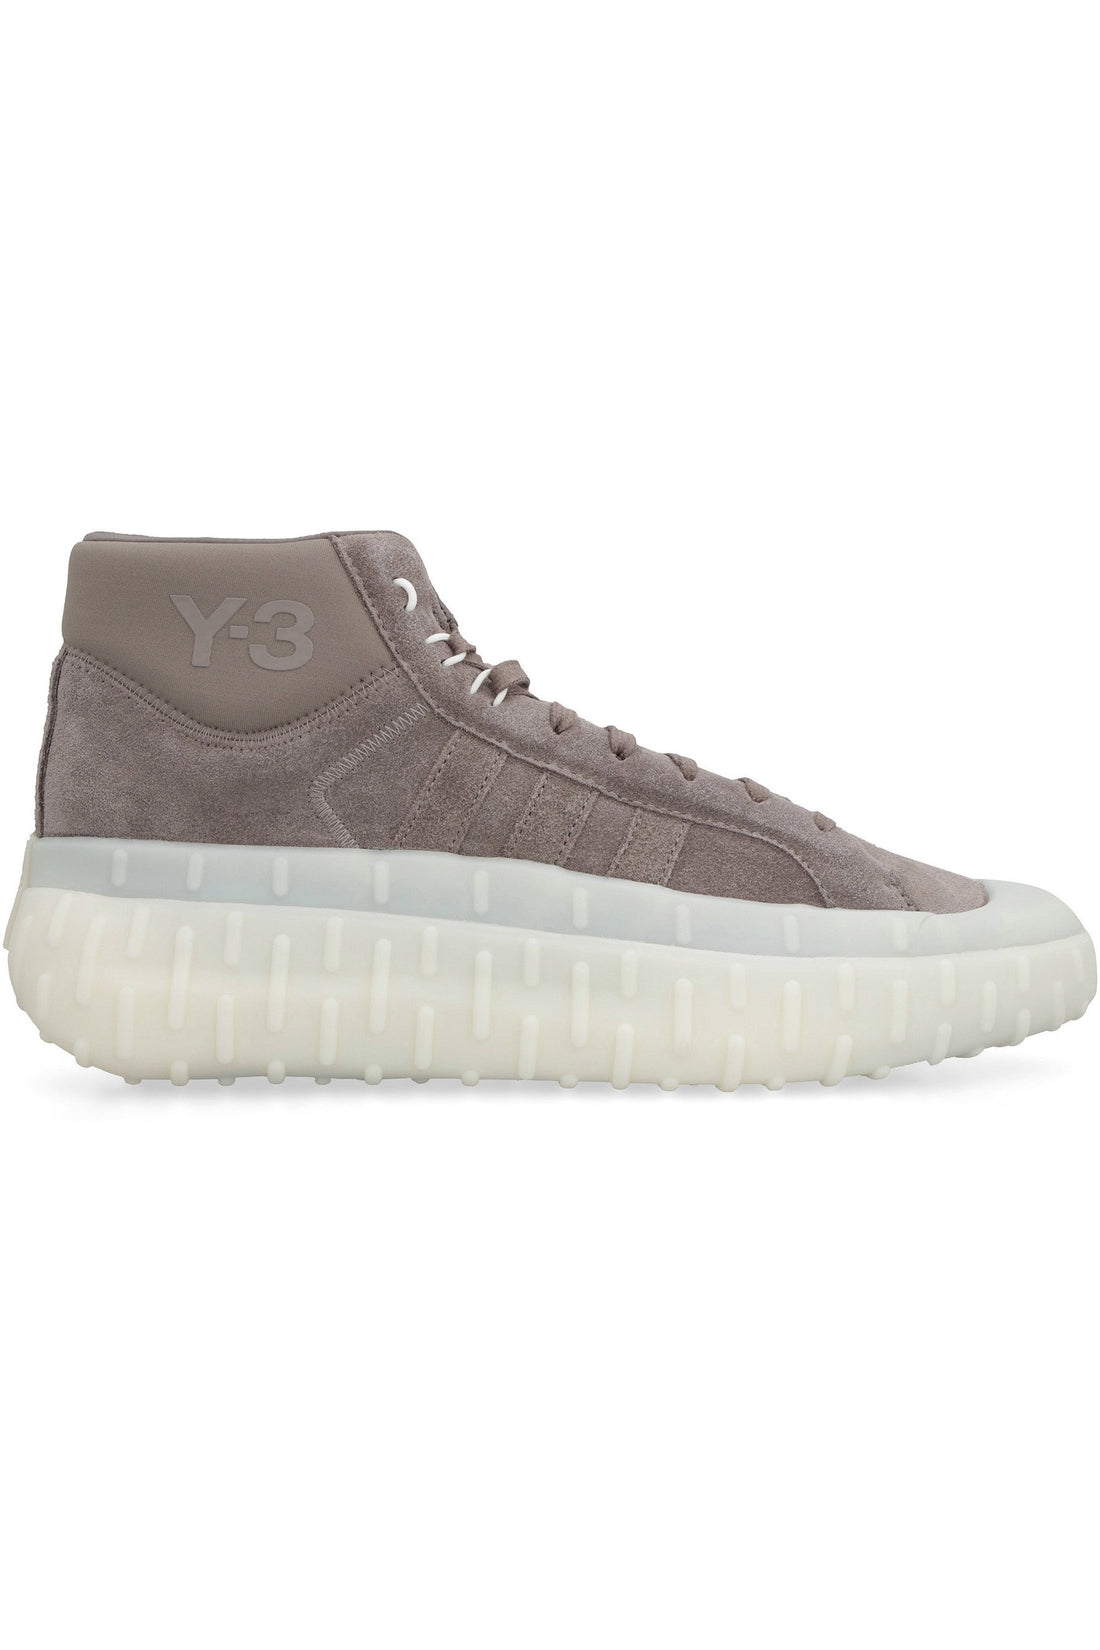 adidas Y-3-OUTLET-SALE-GR.1P suede high-top sneakers-ARCHIVIST